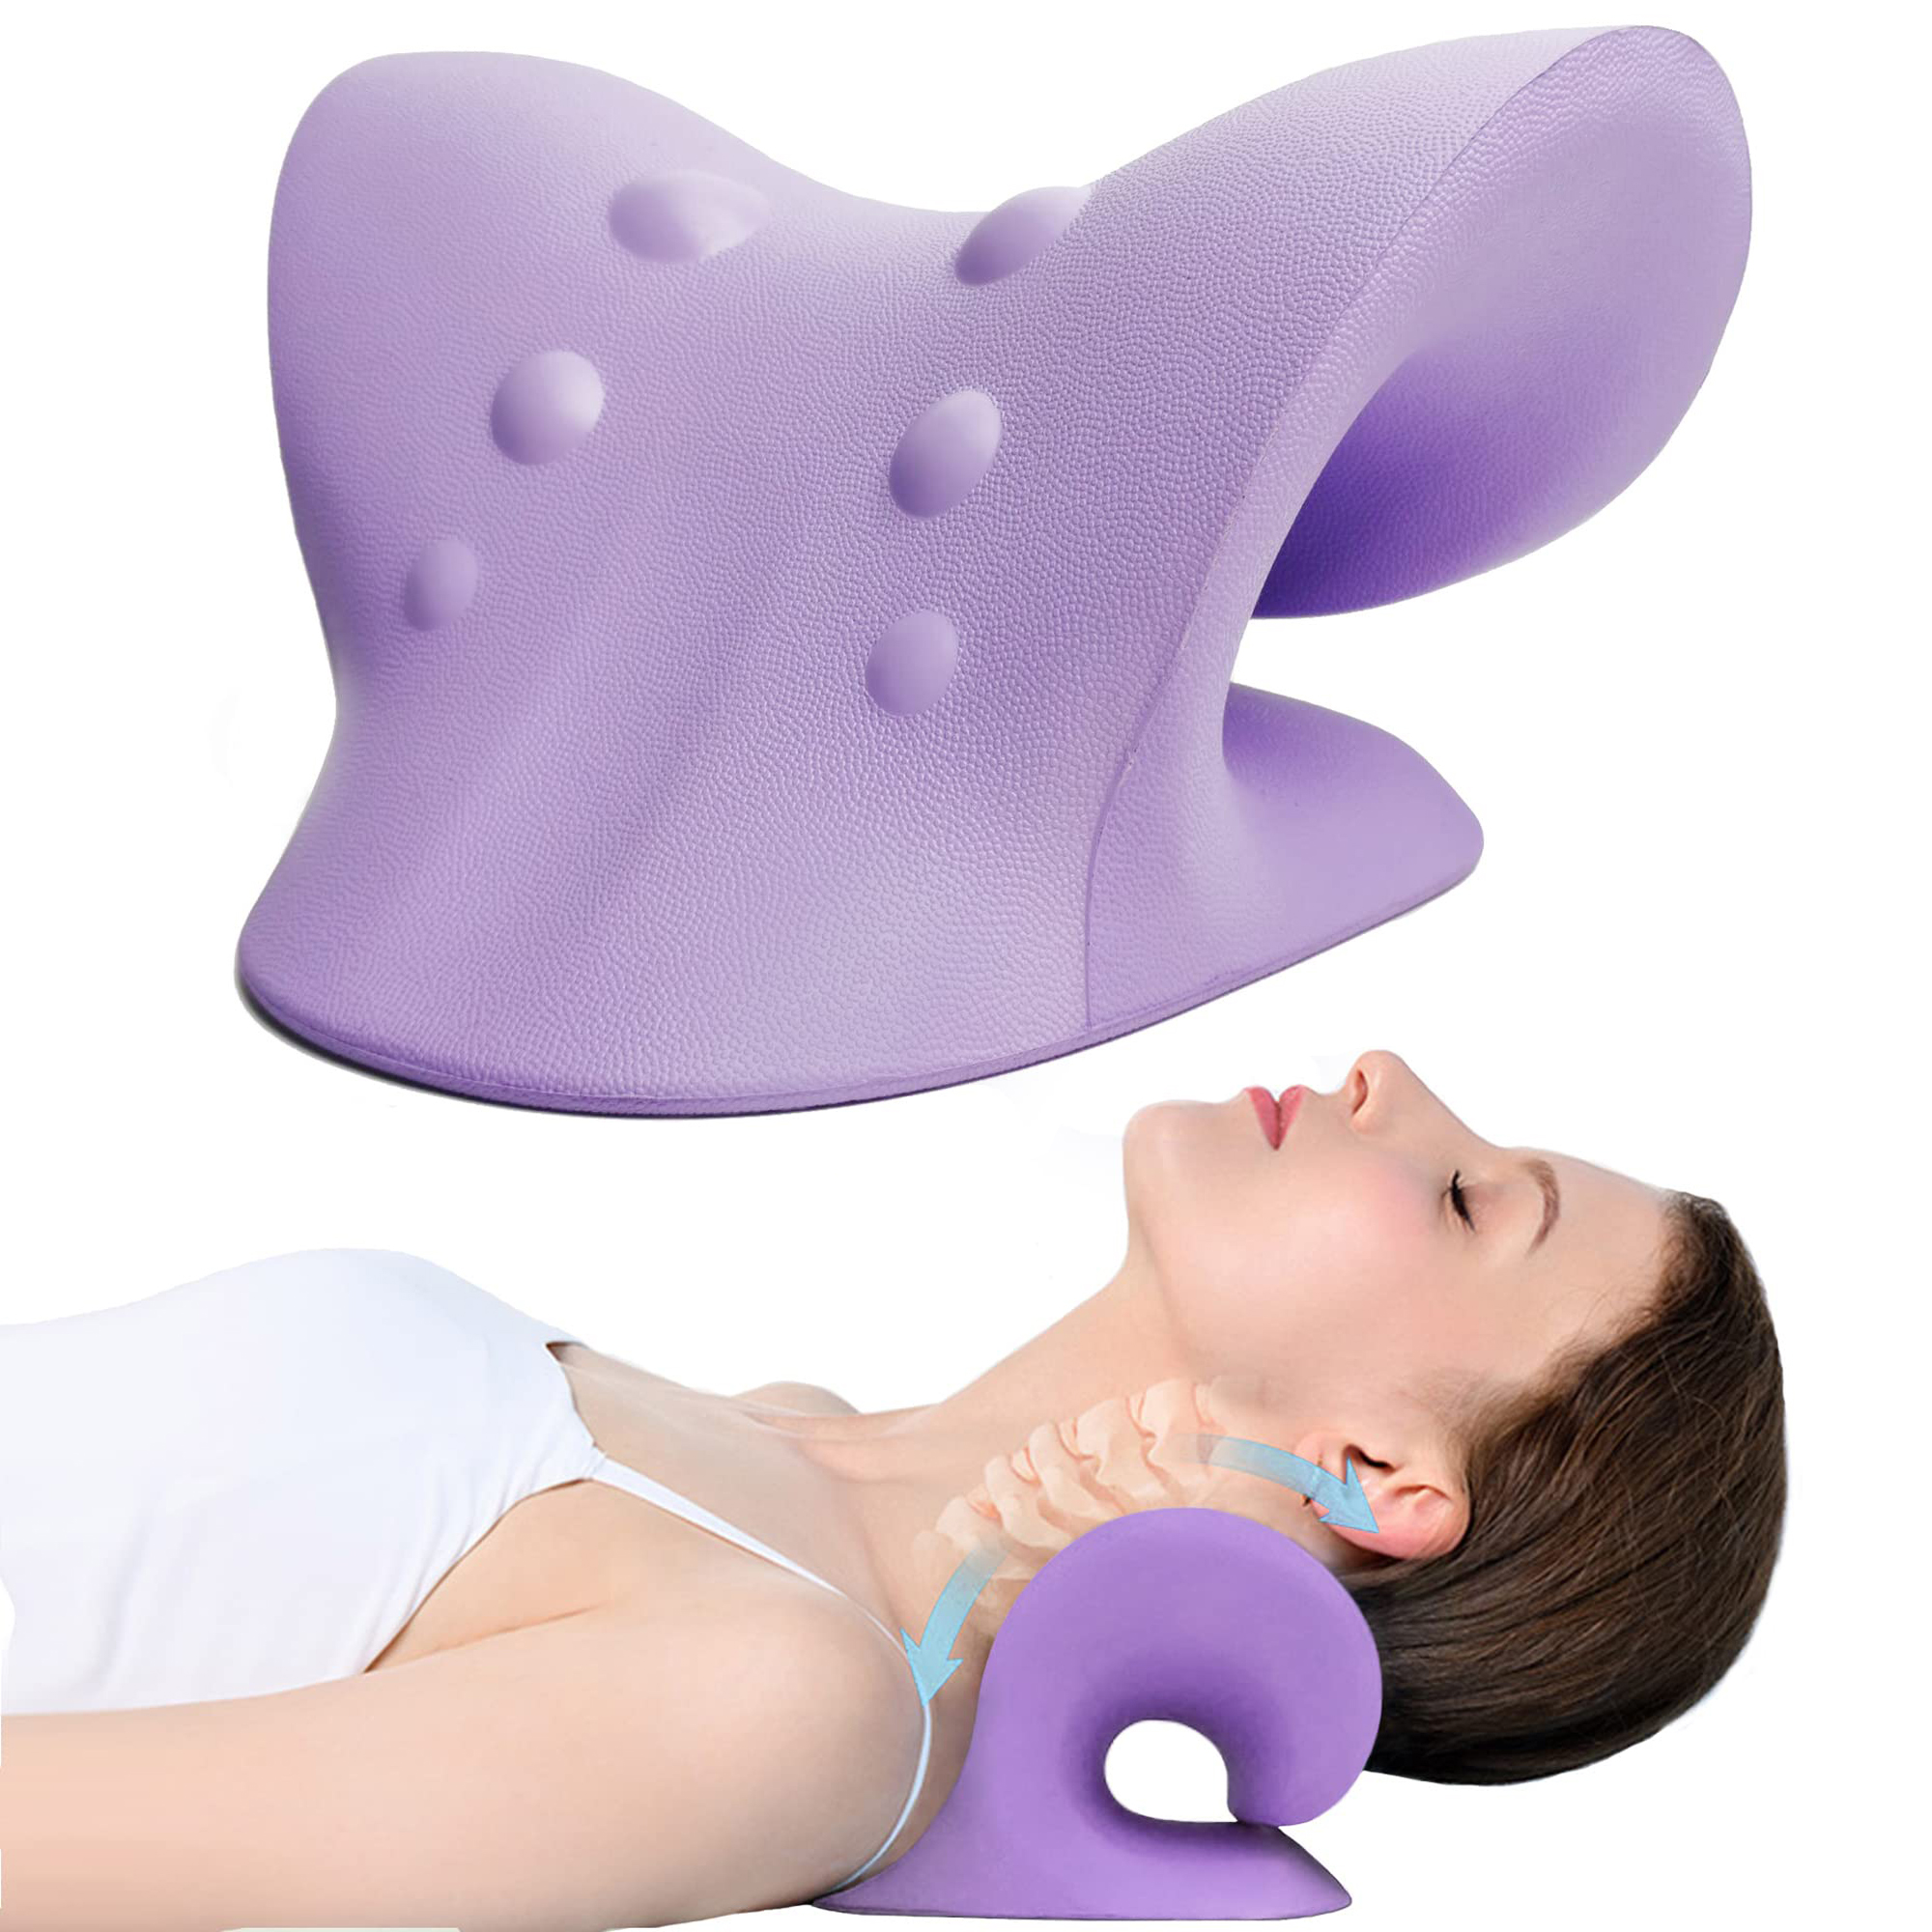 Longrv Neck and Shoulder Relaxer - Cervical Traction Device for TMJ Pain  Relief and Cervical Spine Alignment, Chiropractic Pillow, Neck Stretcher -  Walmart.com